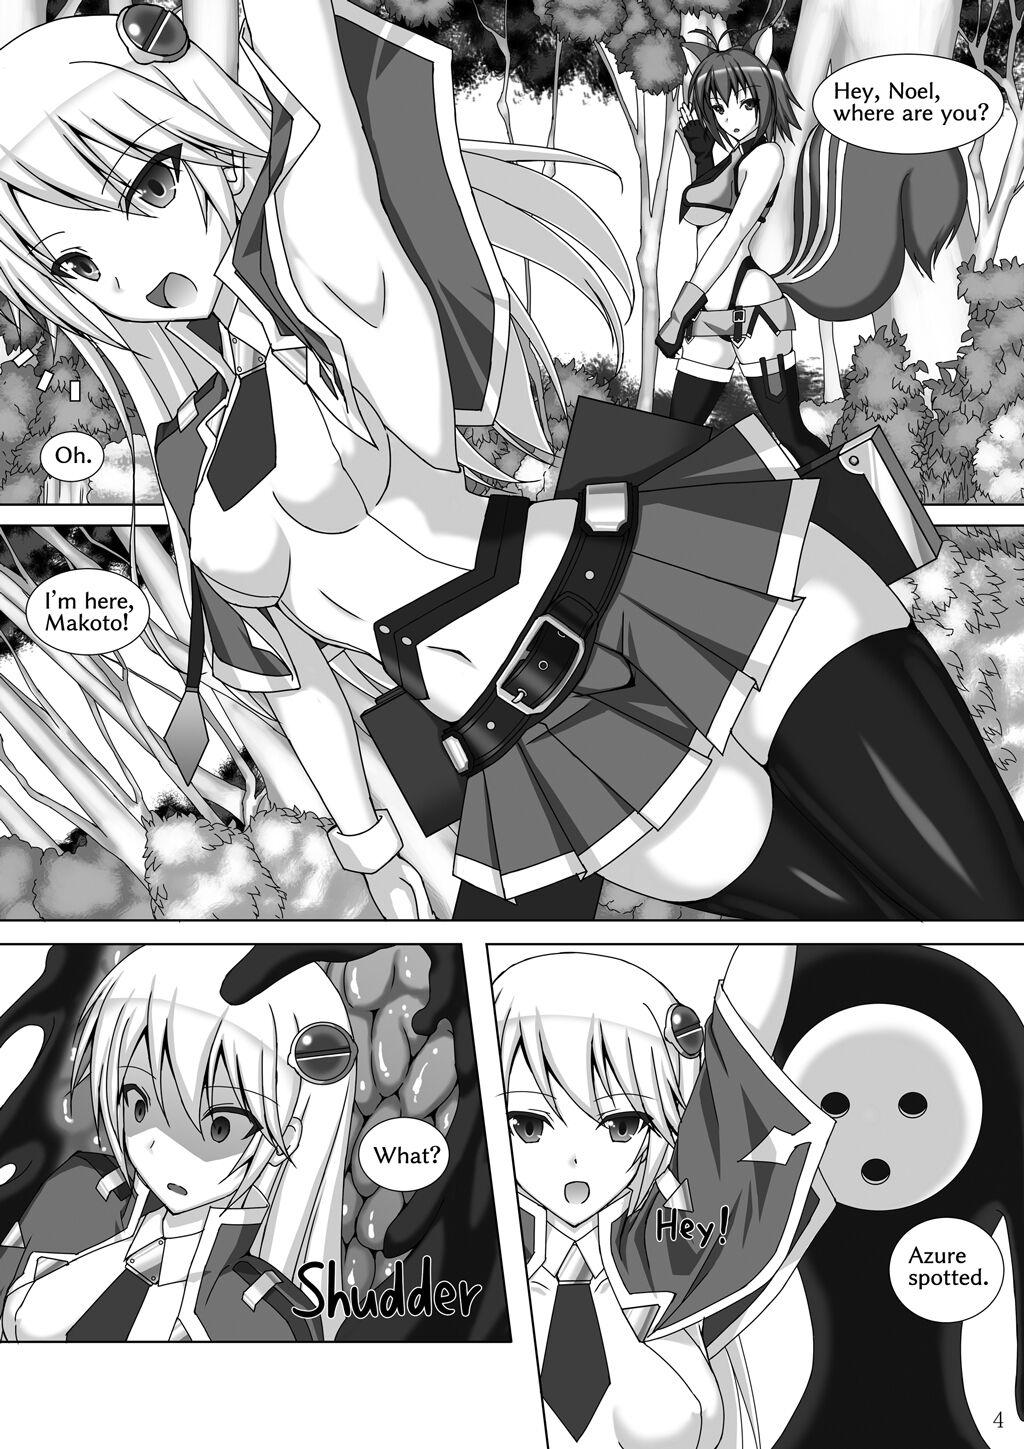 Licking Pussy Noel Doesn't hate Arakune Anymore! 3 - Blazblue Tight - Page 5